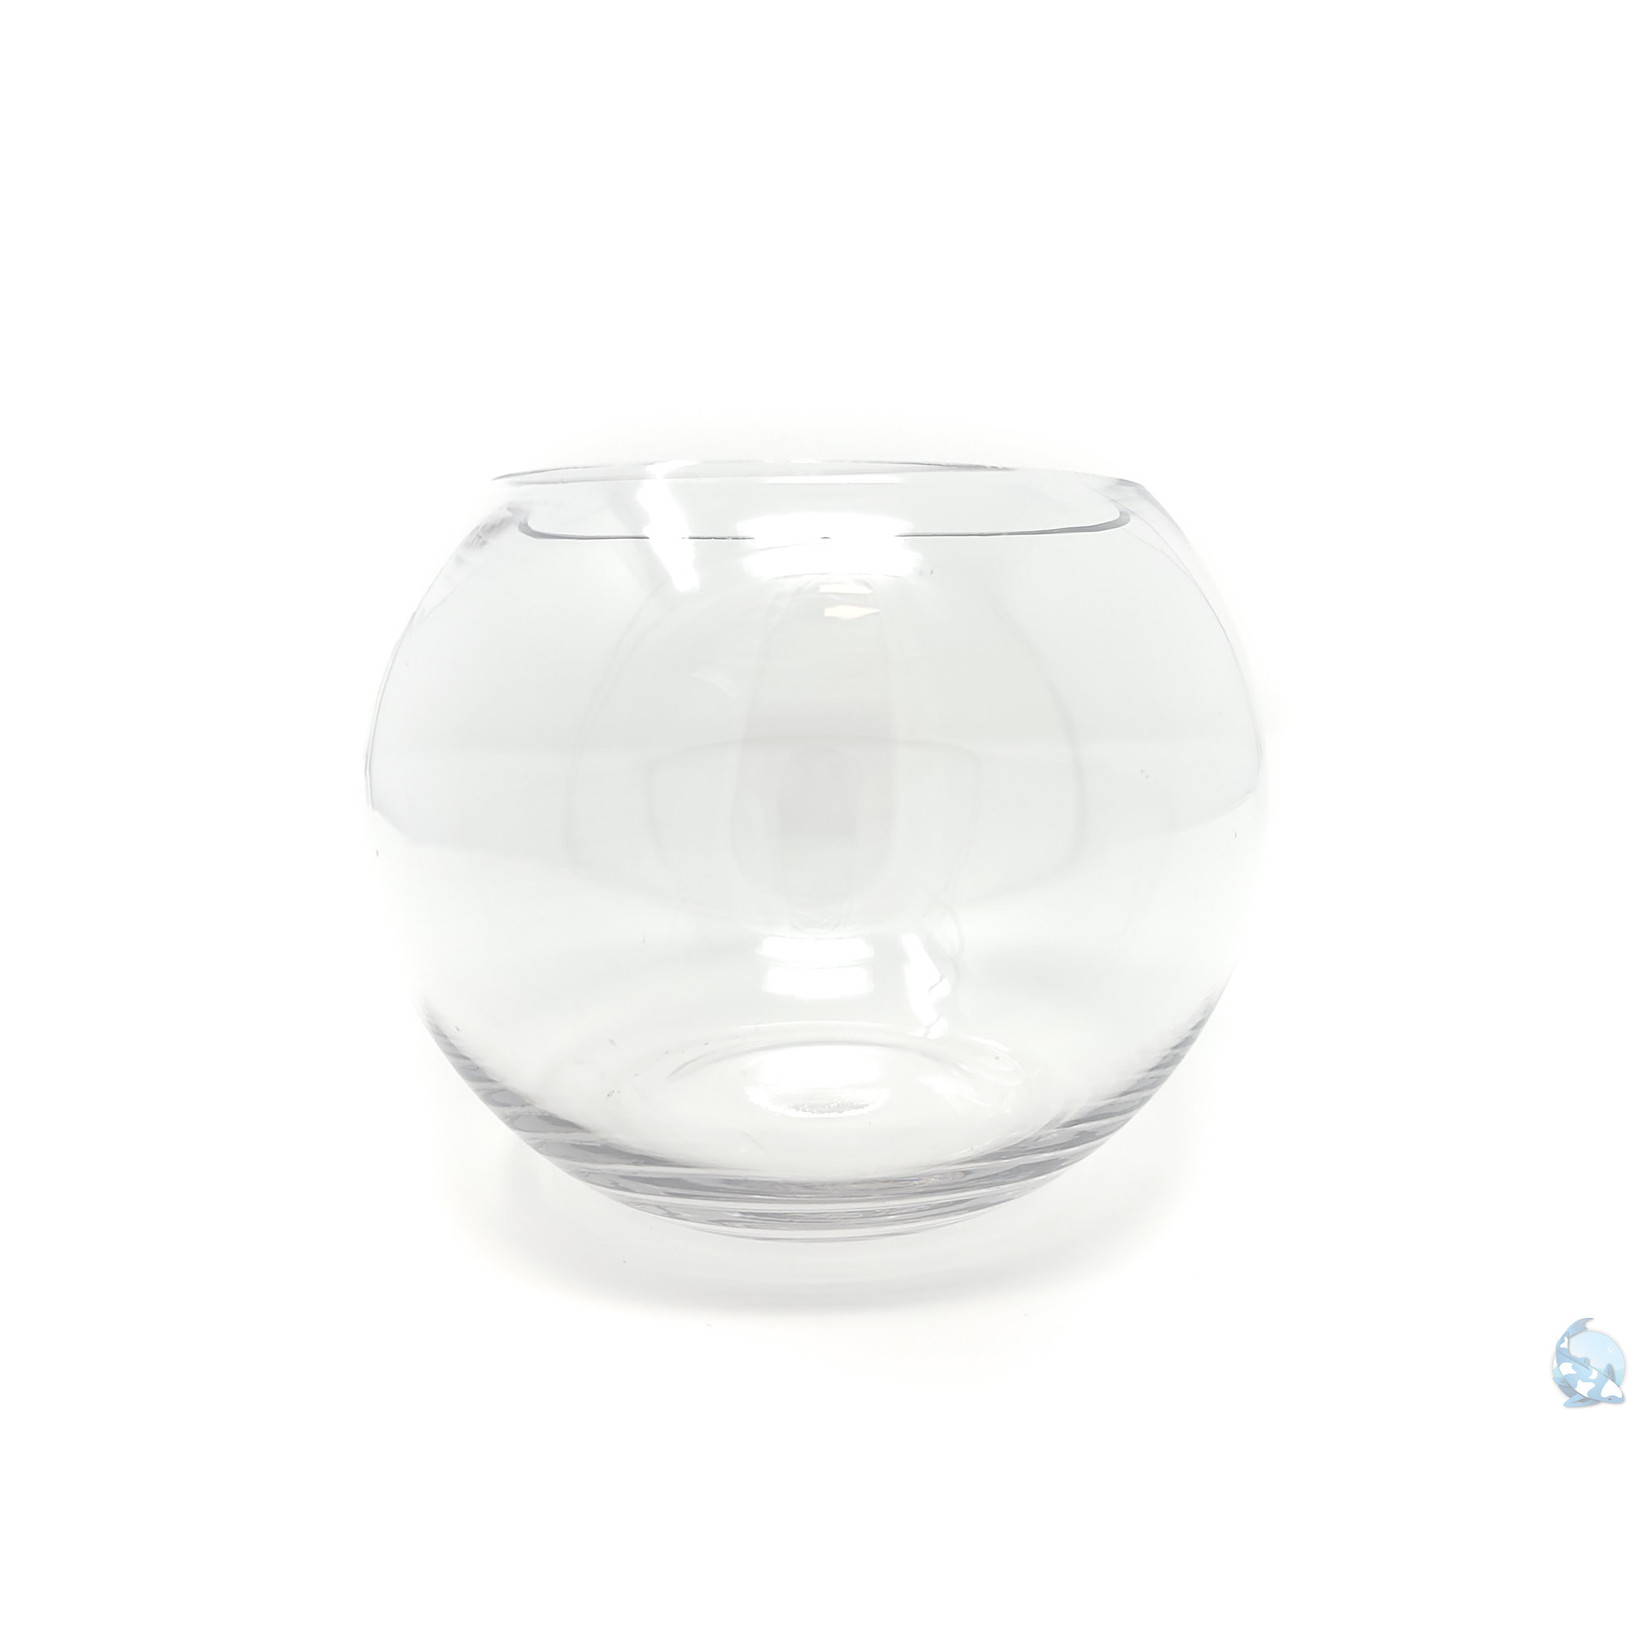 Nuterro Solutions Glass Bowl - 7 inch